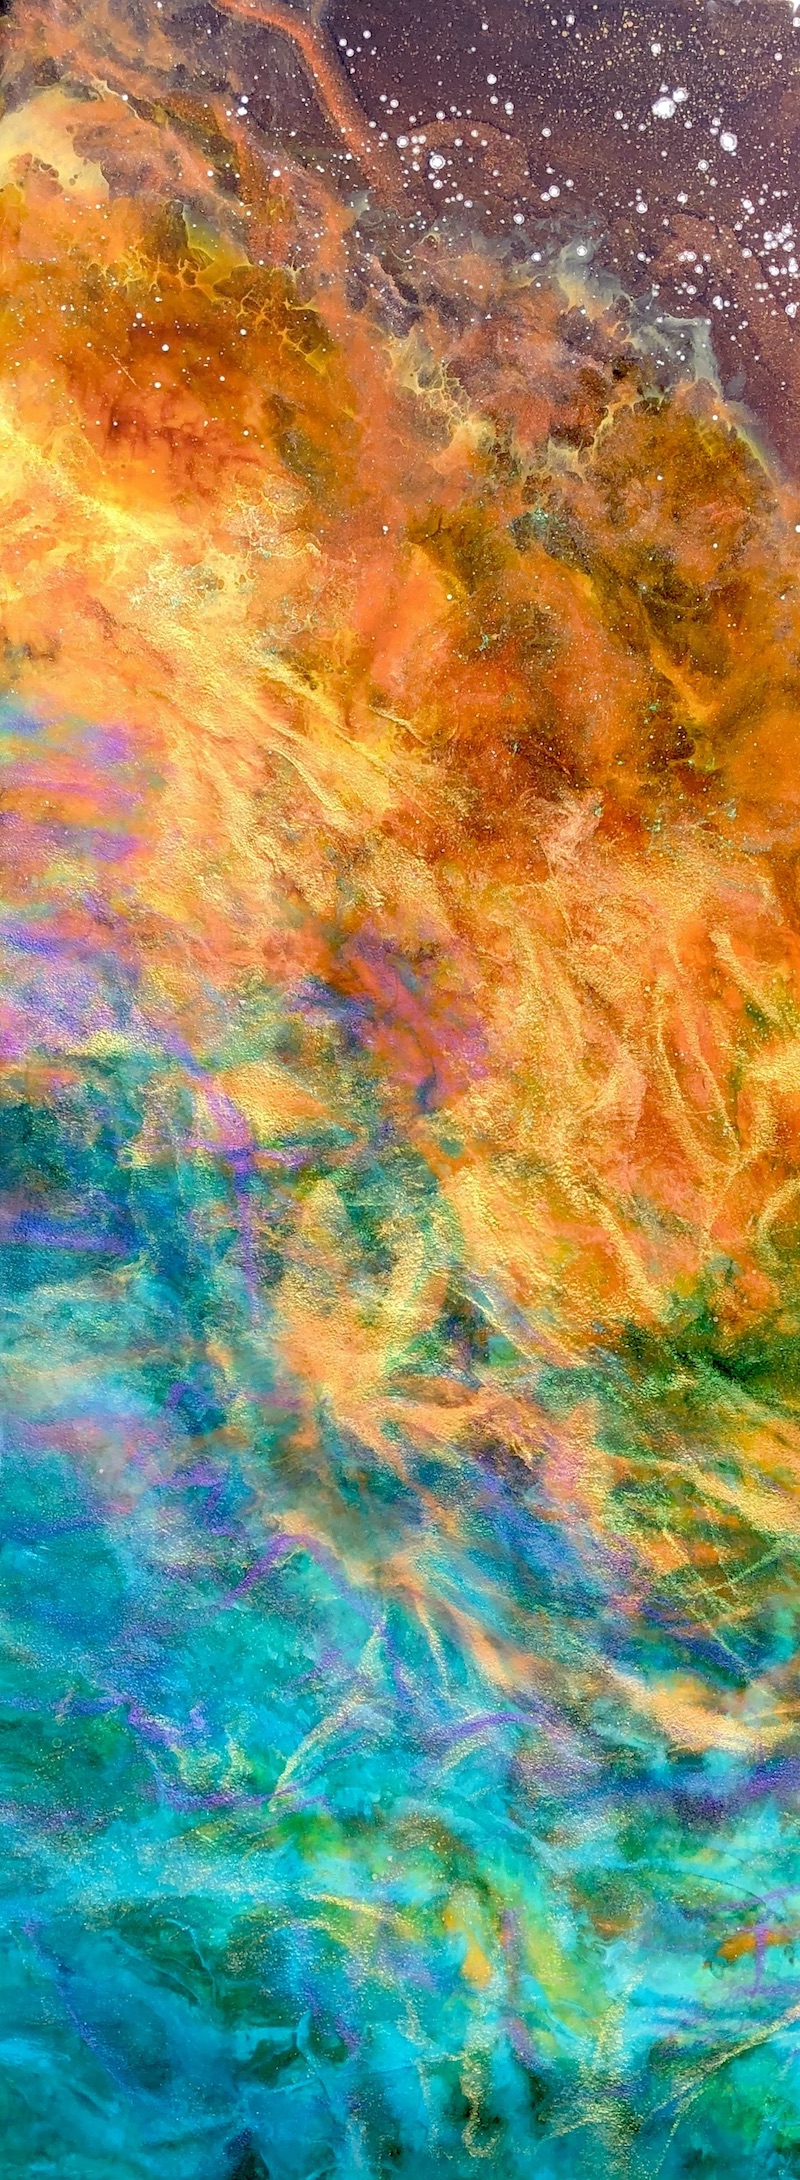 JELLYFISH NEBULA | Resin Painting with Optional LED Strips for Ambient Backlighting